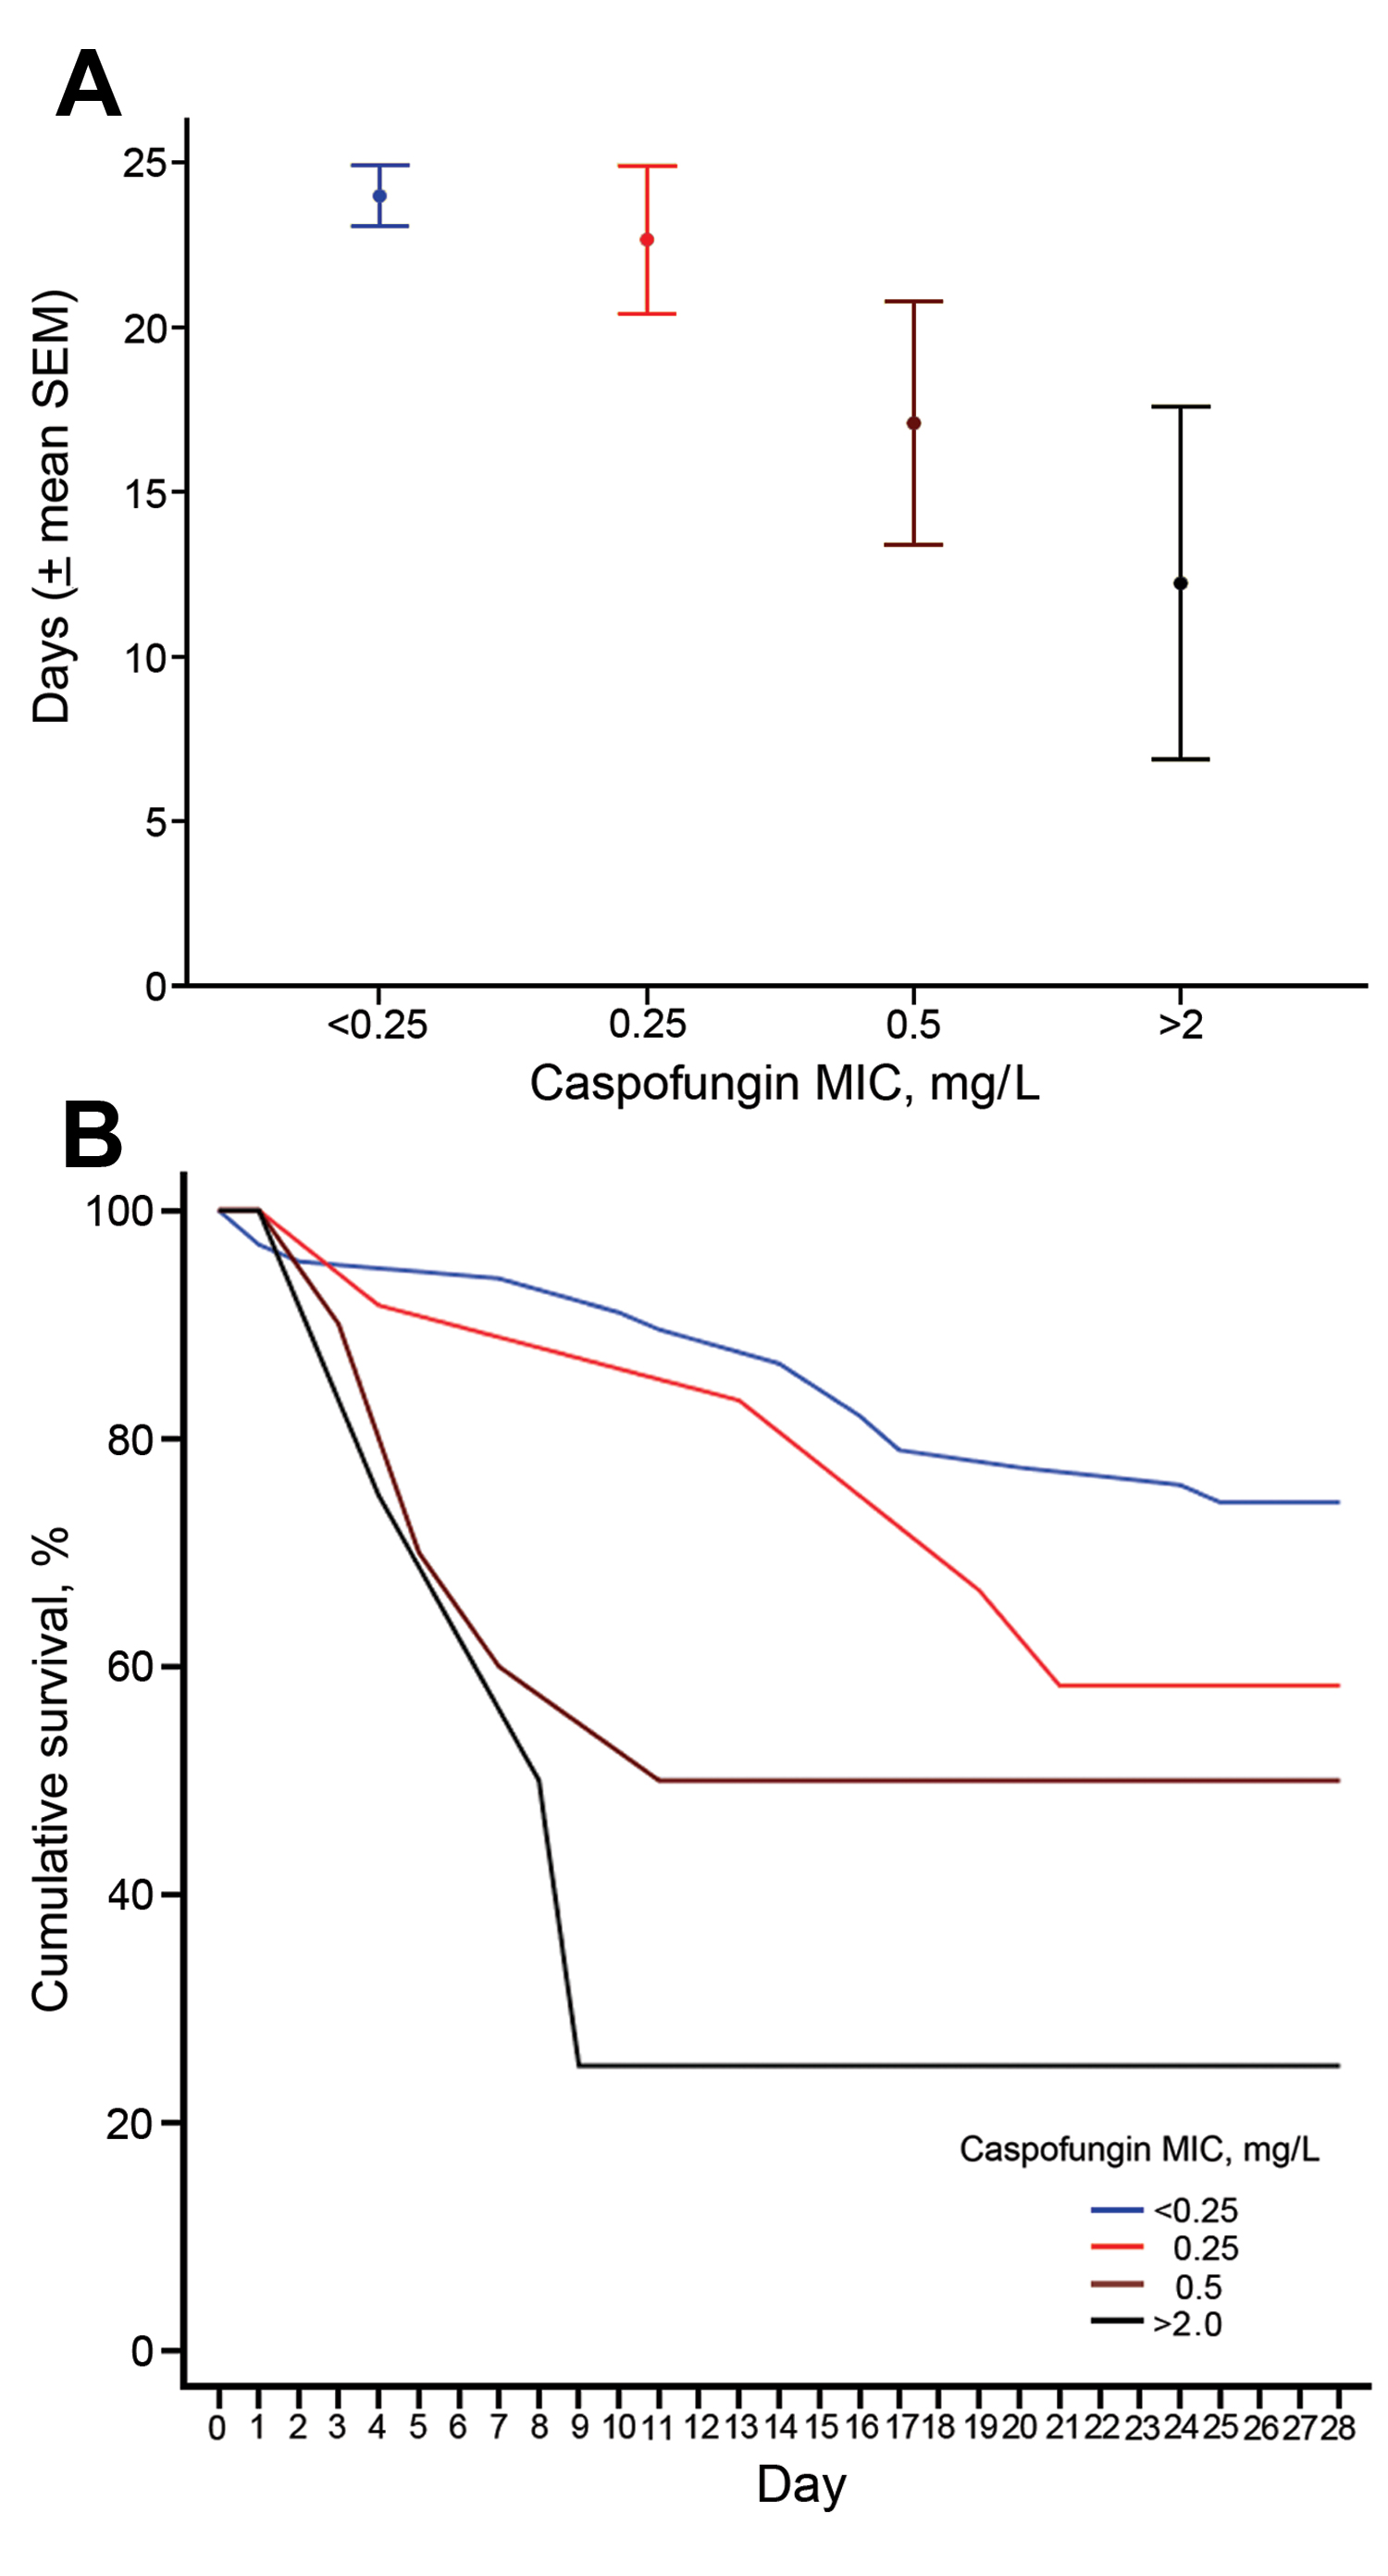 A) Mean 28-day survival (days, mean ± SE) and B) Kaplan-Meier survival curves, relative to caspofungin MIC and susceptibility in Candida glabrata isolates, according to the updated definitions (susceptible: MIC&lt;0.25 mg/L, intermediate: MIC = 0.25 mg/L, resistant: MIC ≥0.5 mg/L) and previous definitions (susceptible: MIC ≤2 mg/L, nonsusceptible: MIC &gt;2 mg/L) among 93 patients who received an echinocandin, MD Anderson Cancer Center, Houston, Texas, USA, March 2005–September 2013; log-rank p 